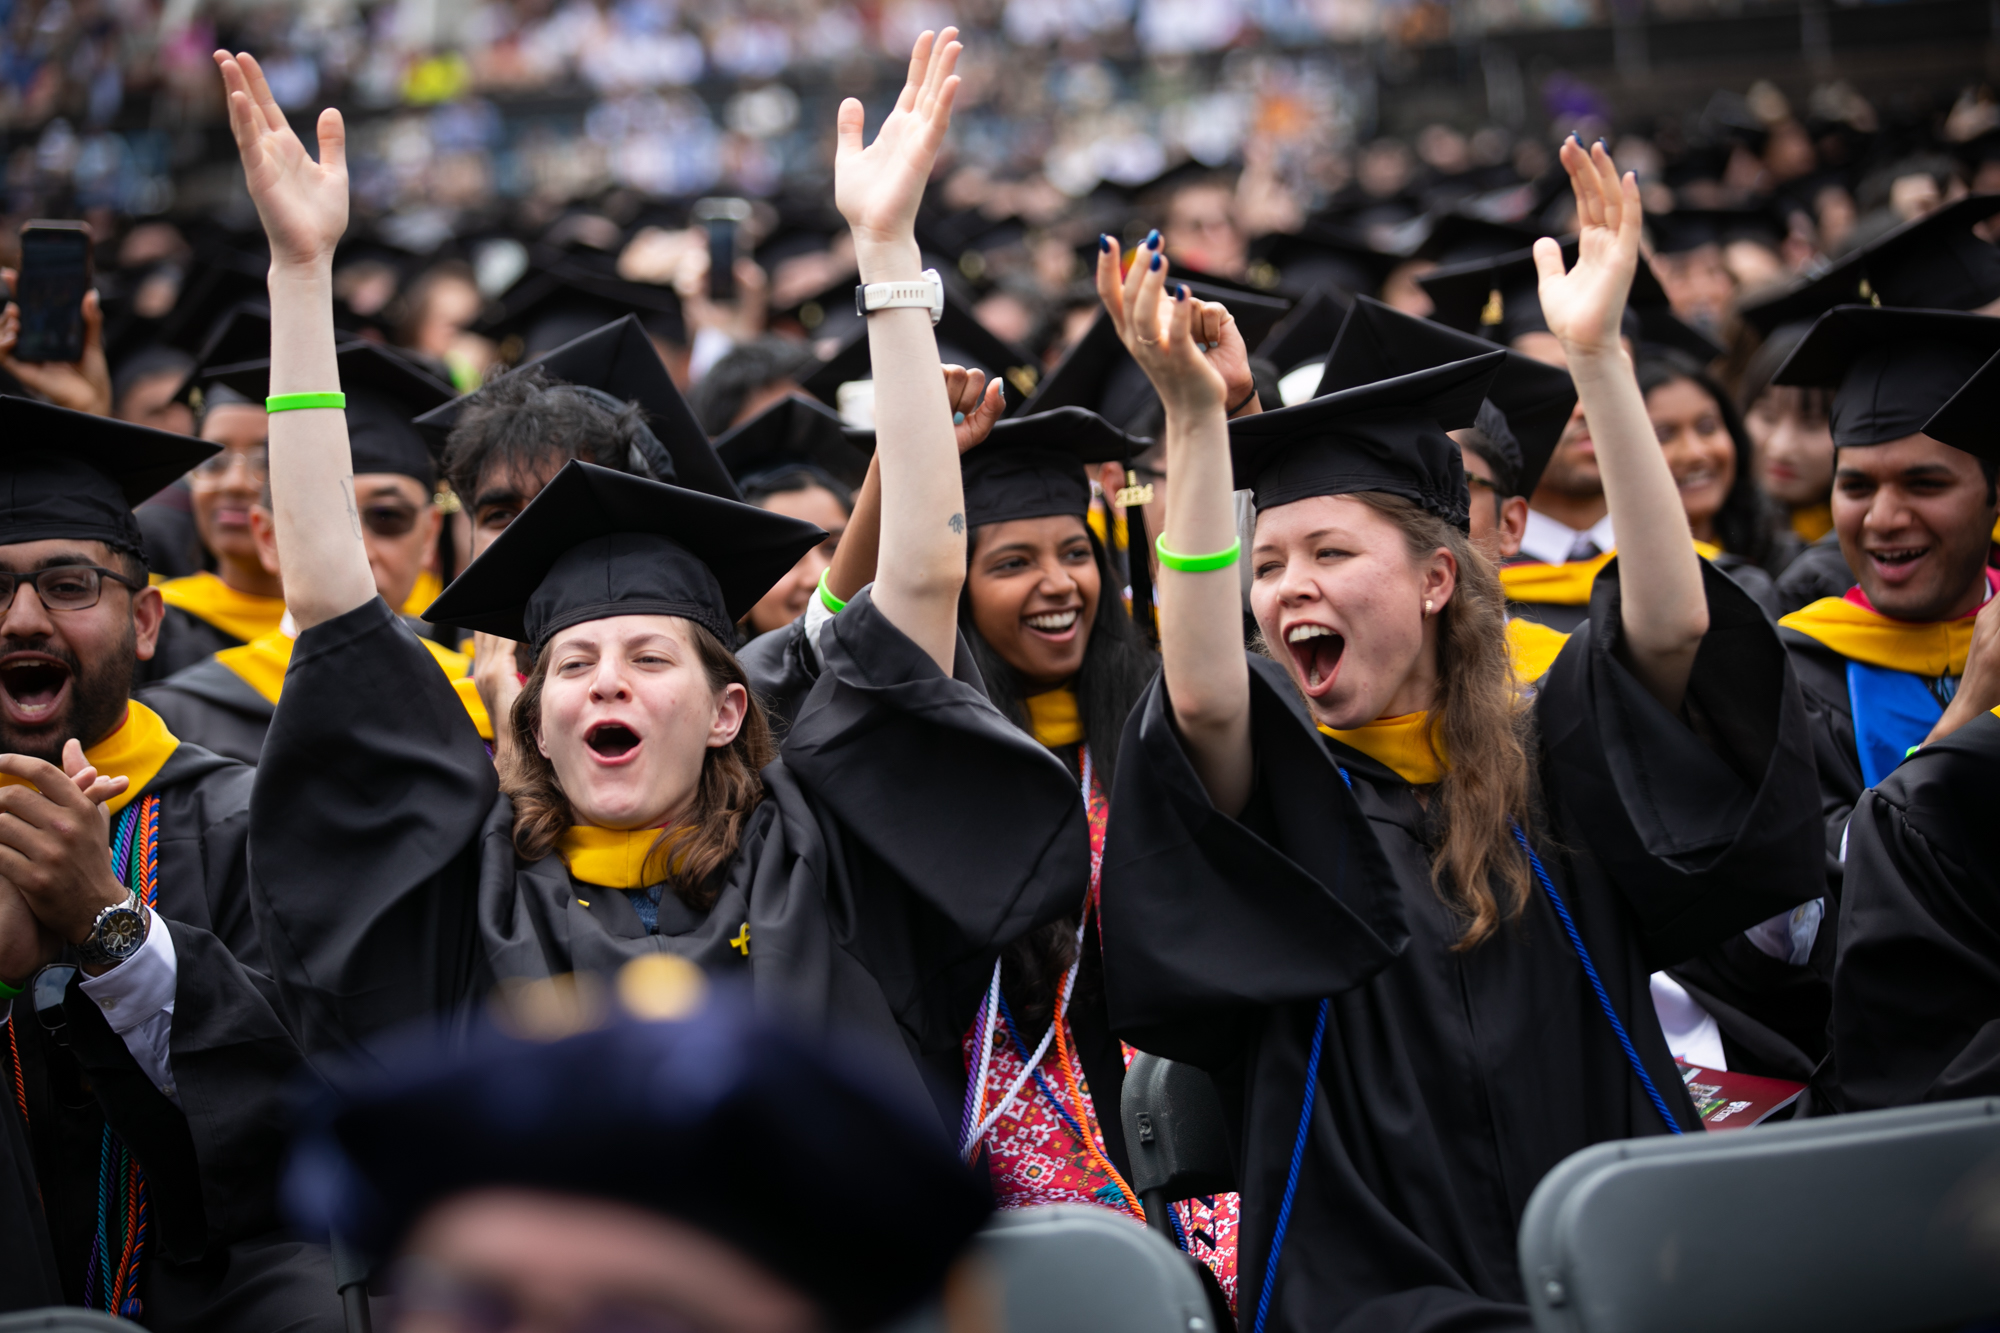 student cheer during commencement ceremony